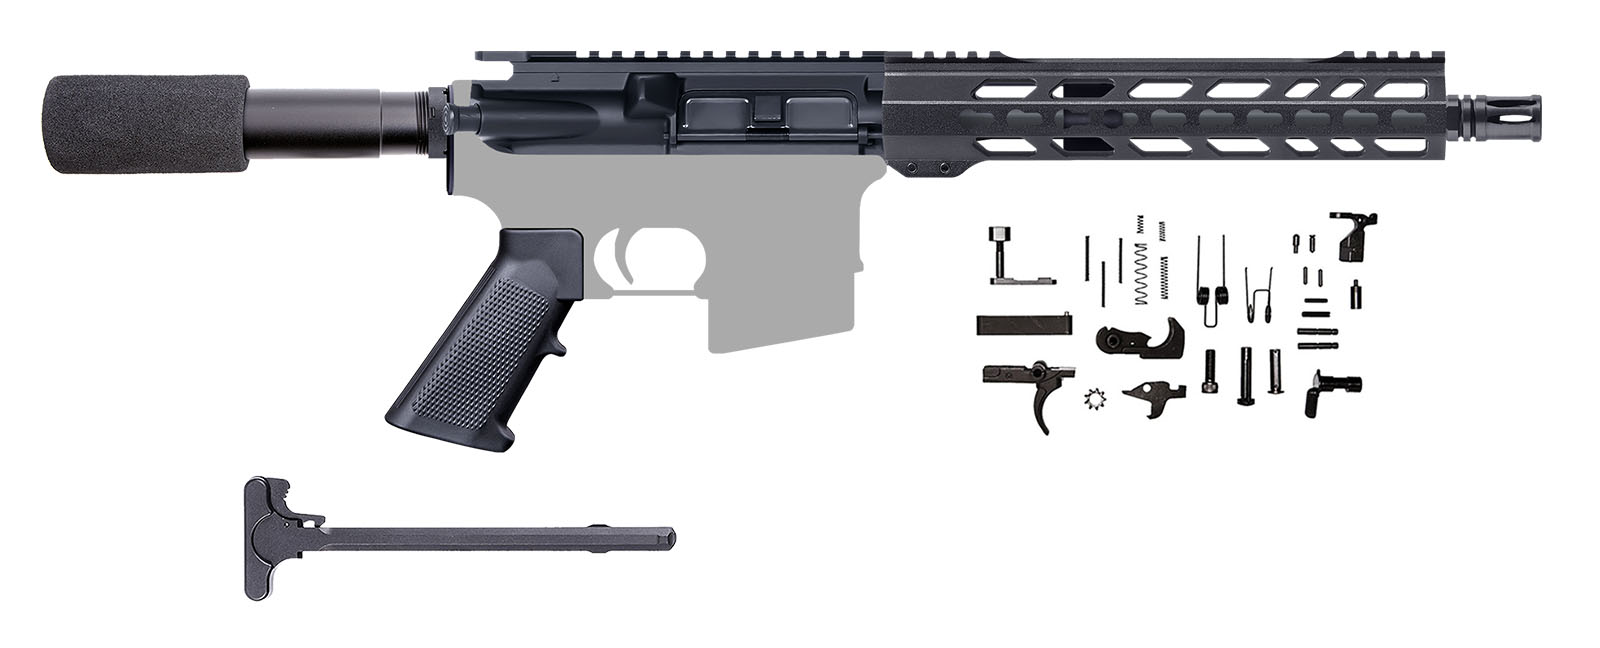 AR-15 Blemished Pistol Kit / 300AAC / 1:8 / 10″ CBC KEYMOD AR-15 HANDGUARD / Pistol Buffer Tube / CHARGING HANDLE / AR-15 LOWER PARTS KIT - B-305-747 (DOES NOT INCLUDE BCG)